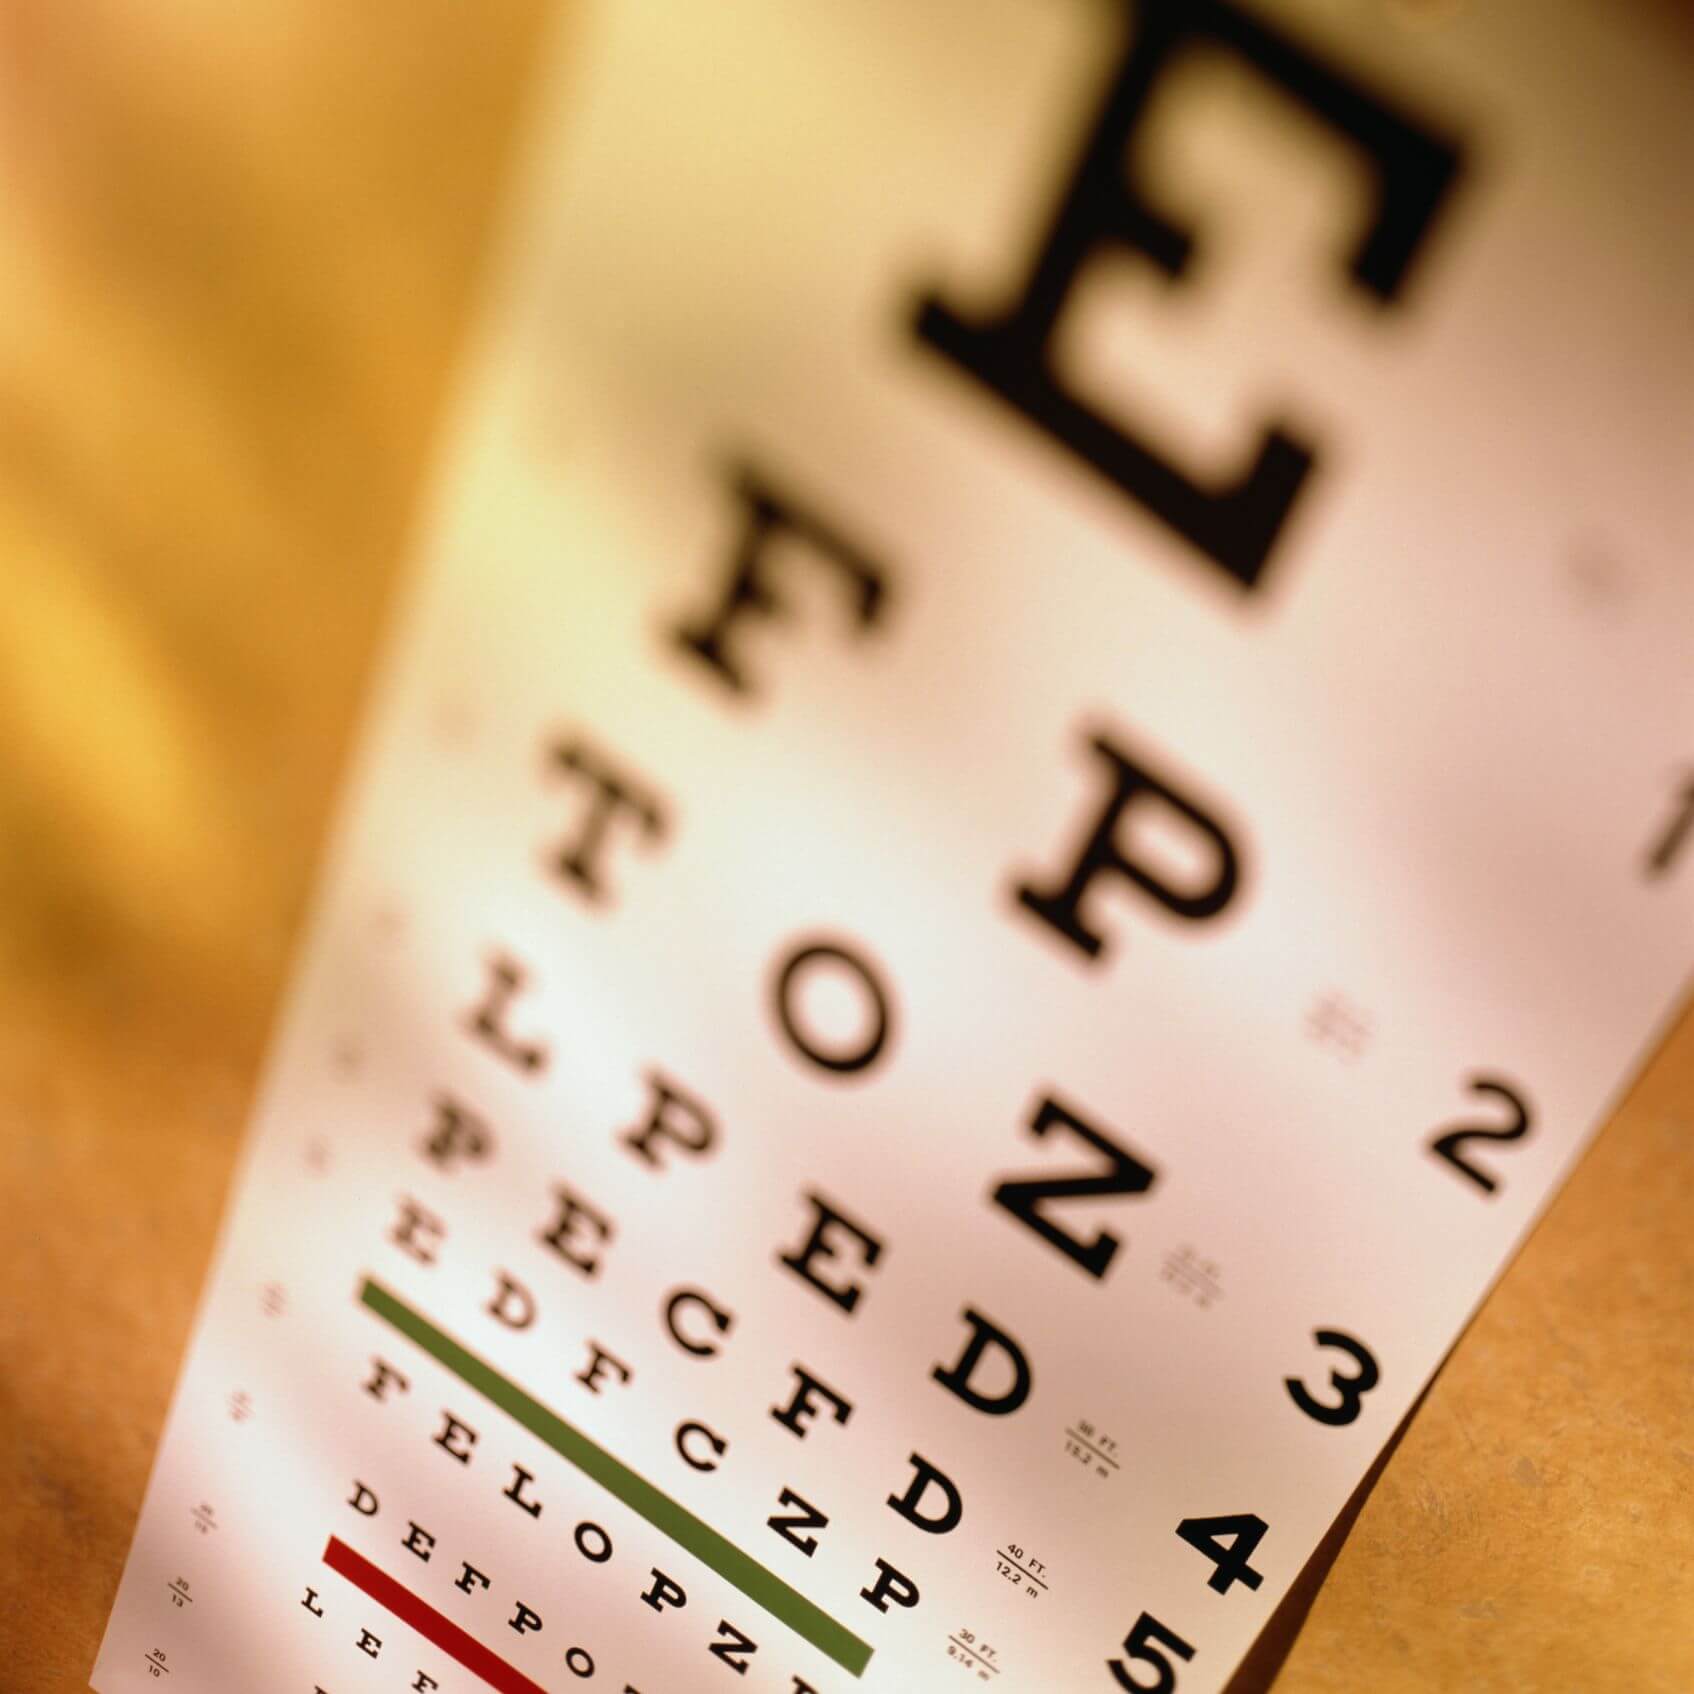 A snellen eye chart, typically used to diagnose vision problems. It is black letters of various sizes, on a white poster, in various rows, with the top letters being bigger and shrinking as you go down. It is on a beige wall.